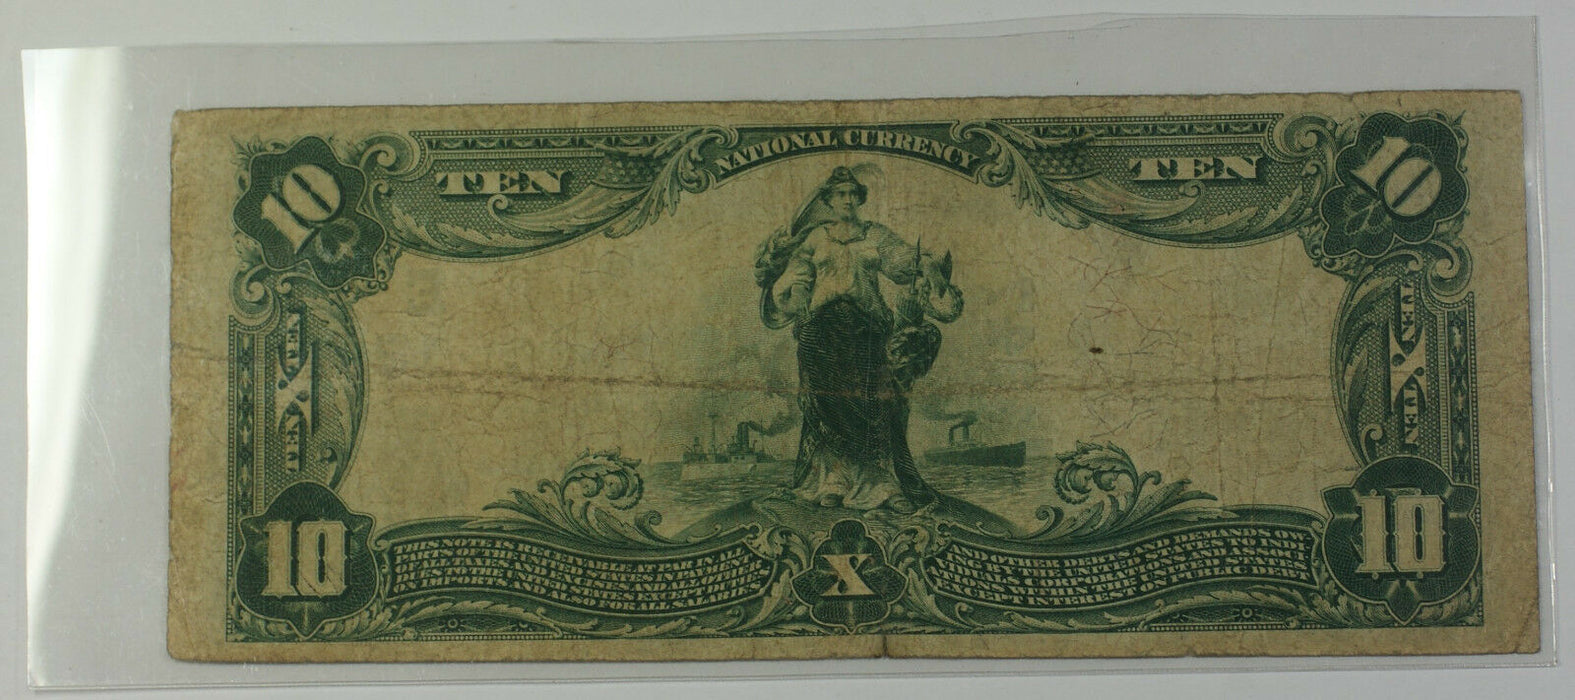 1902 Plain Back $10 National Currency Banknote Cohoes New York Charter # E 1347